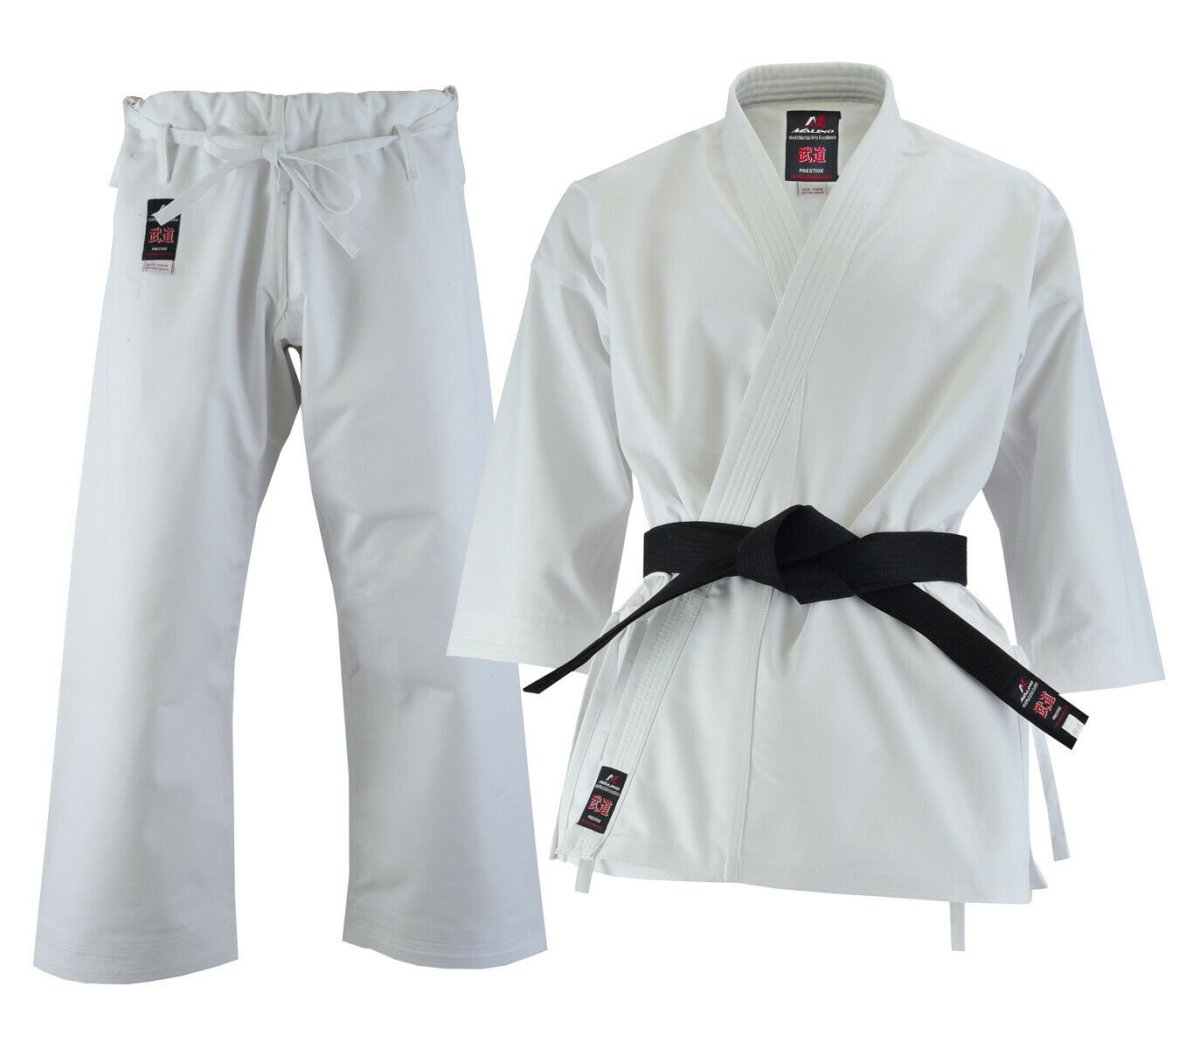 Karate clothes